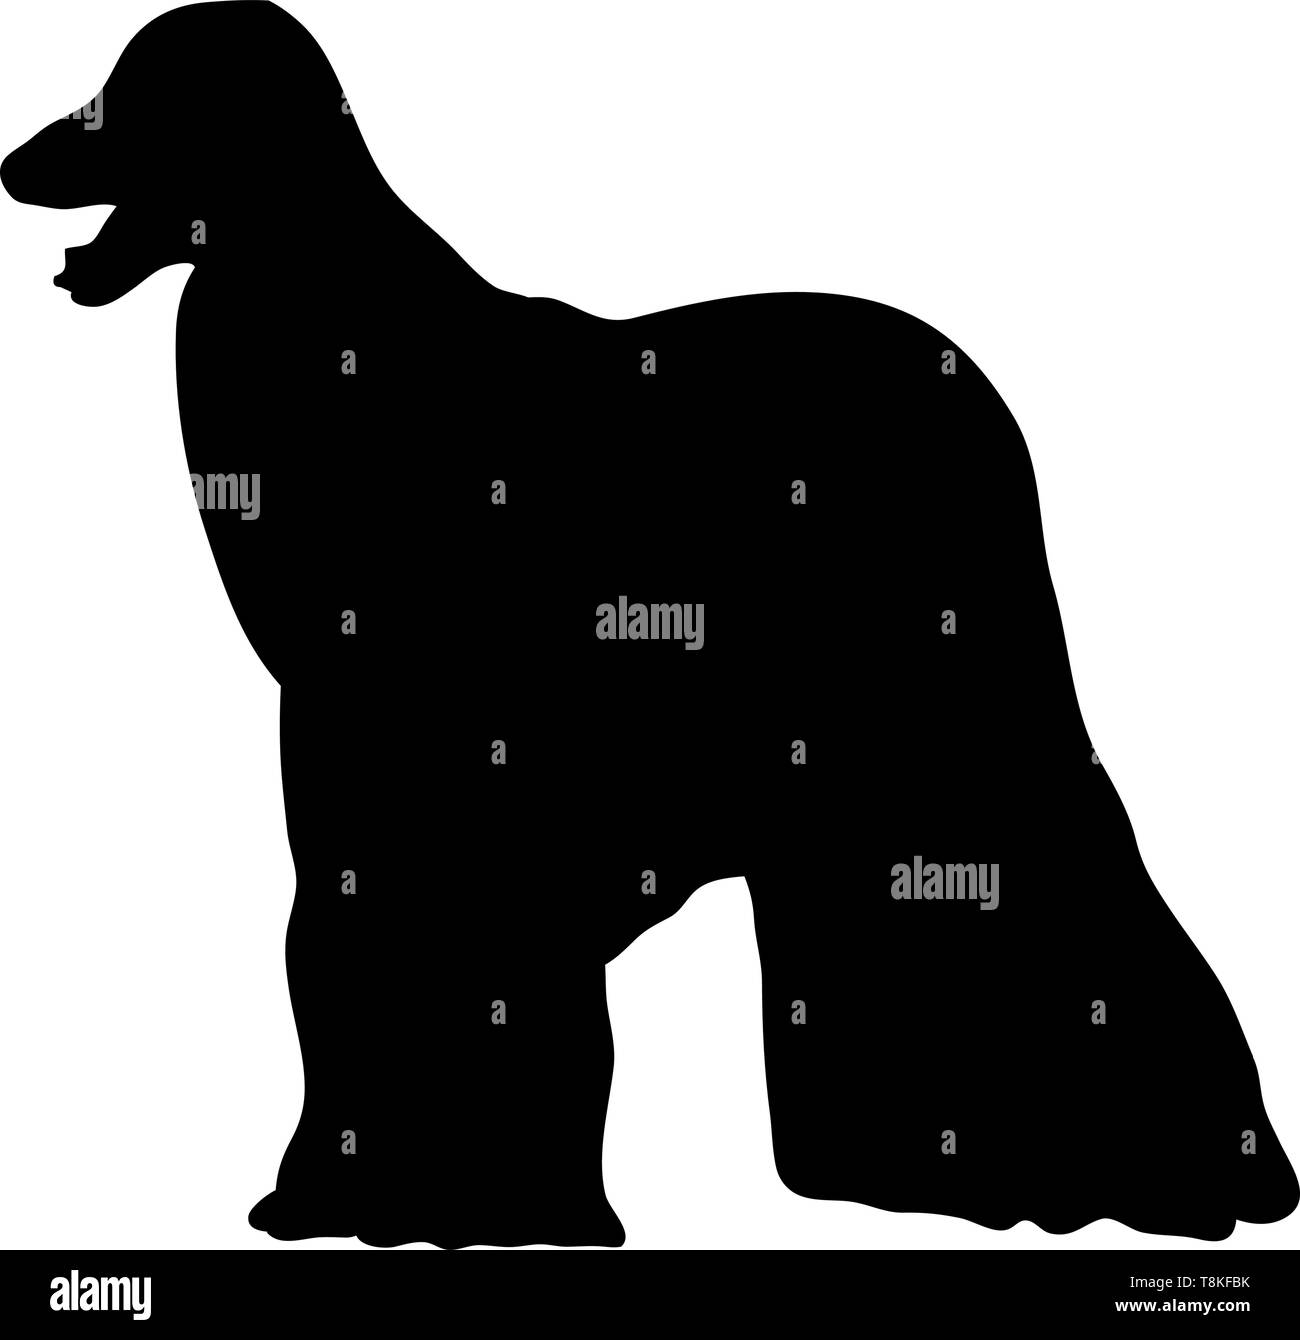 Afghan Hound Dog Silhouette. Smooth Vector Illustration. Stock Vector